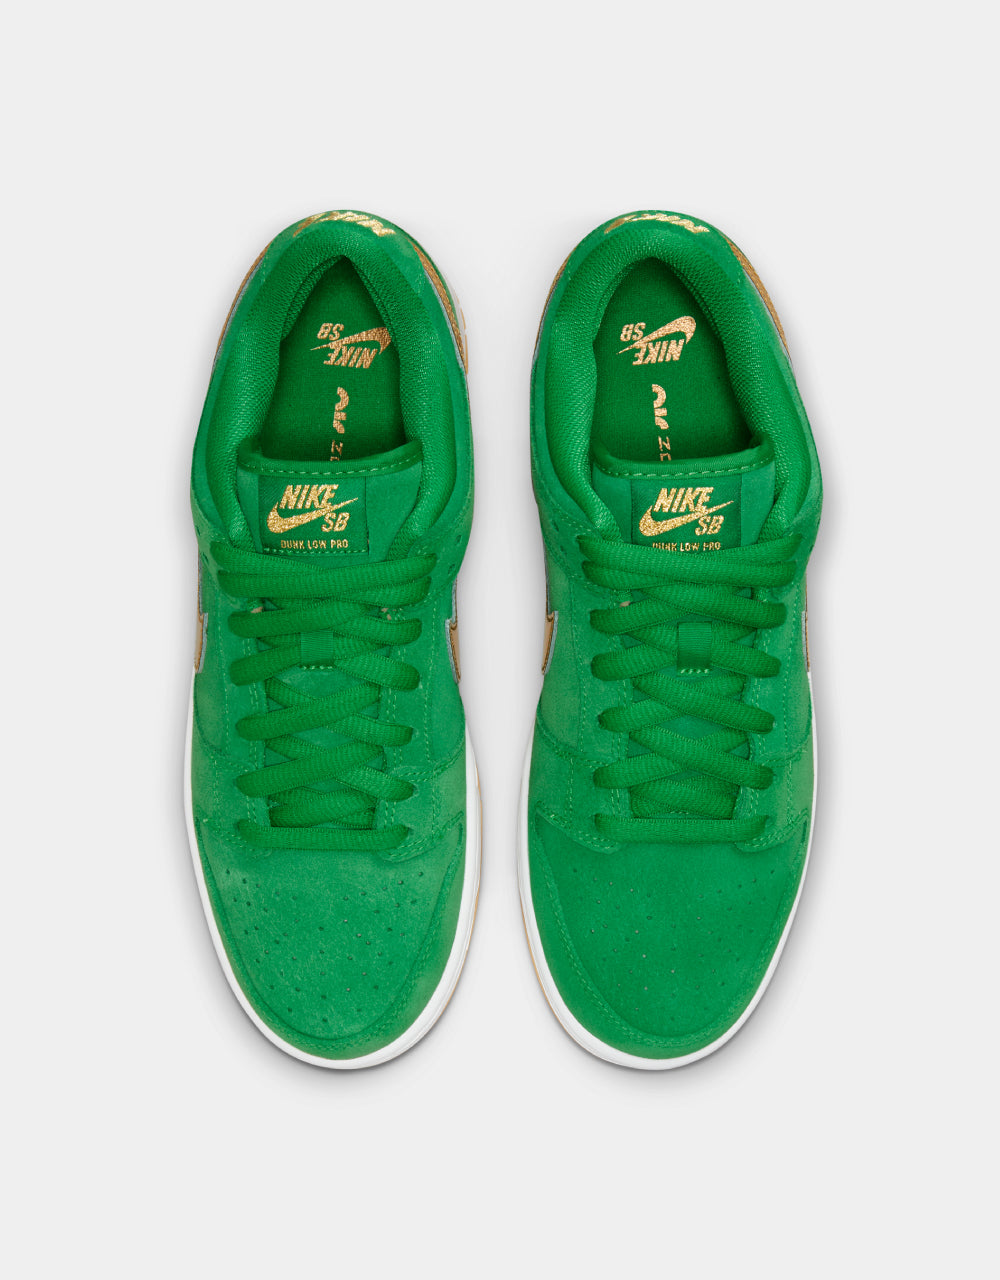 Nike SB 'Lucky' Dunk Low Pro Skate Shoes